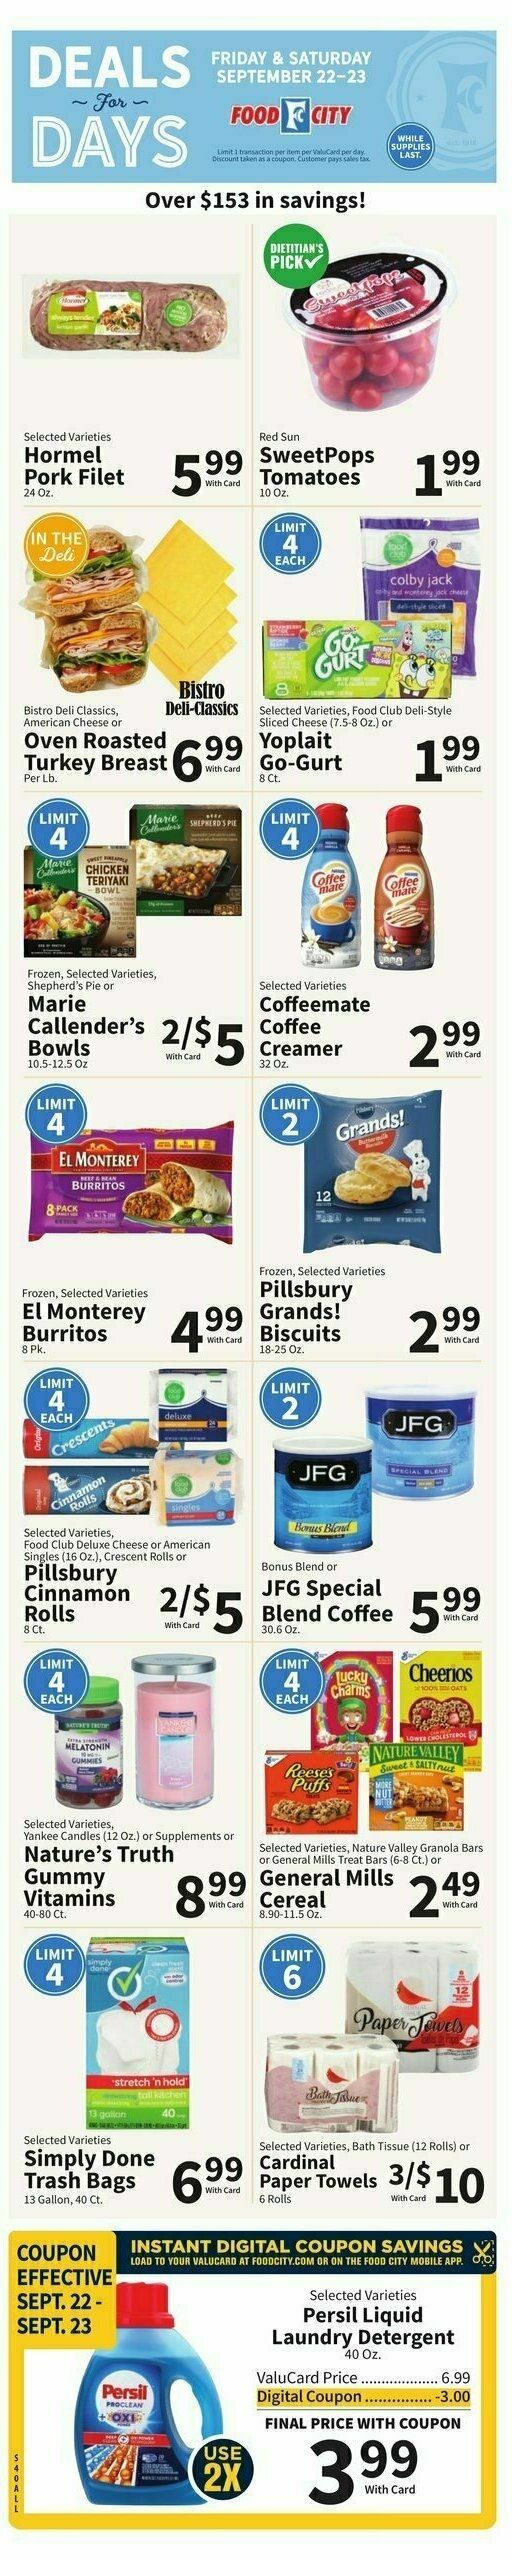 Food City Weekly Ad from September 20